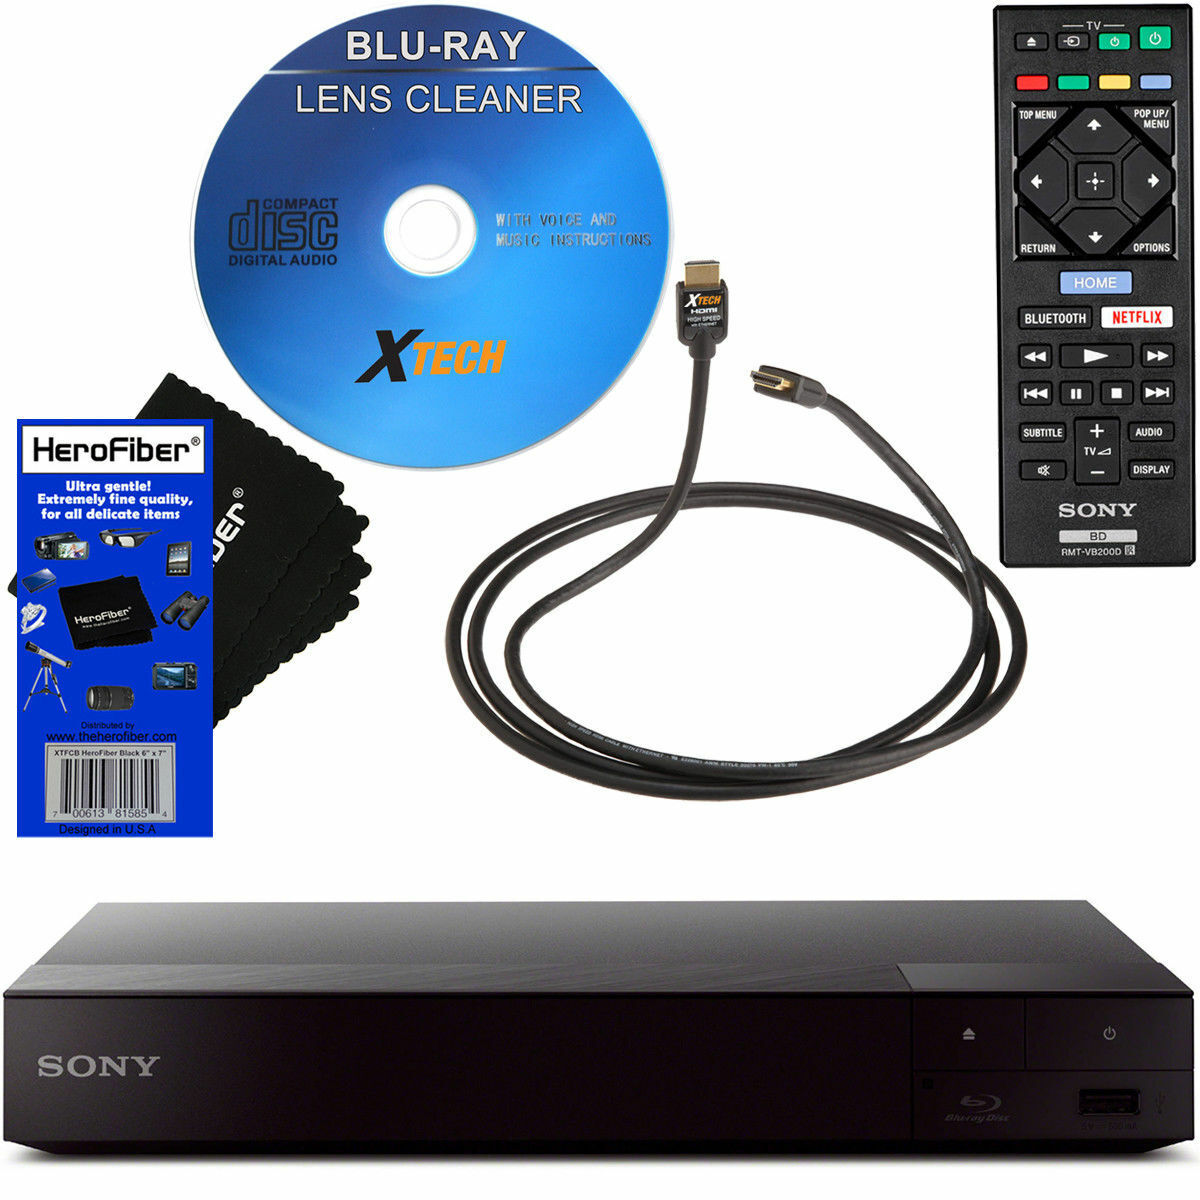 Sony BDP-S3700 Blu-Ray Player with 1080p HD Resolution & Built-In Wi-Fi, Black